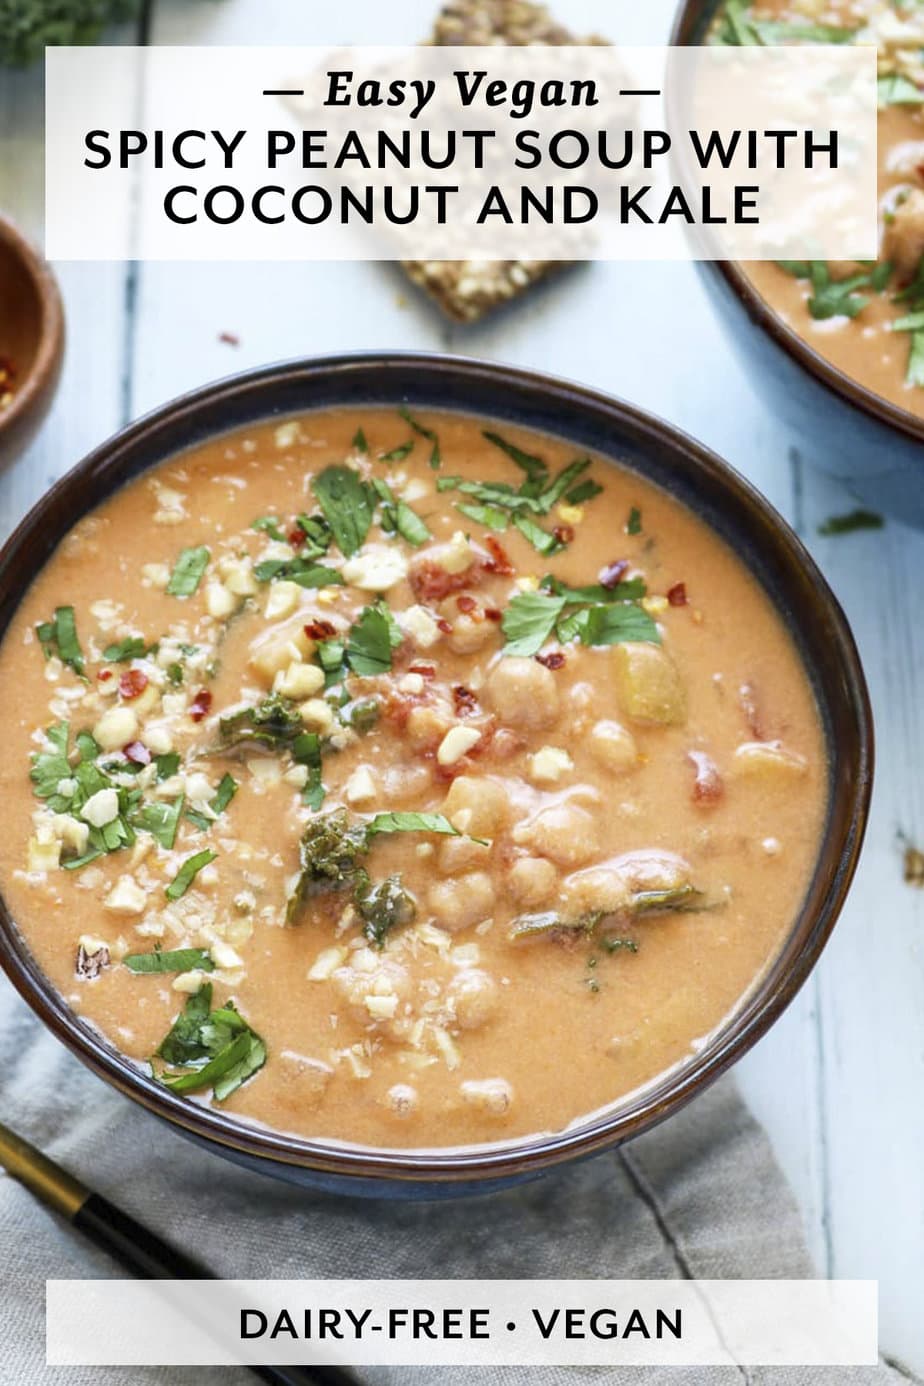 Spicy Peanut Soup with Coconut and Kale Recipe - Well Vegan